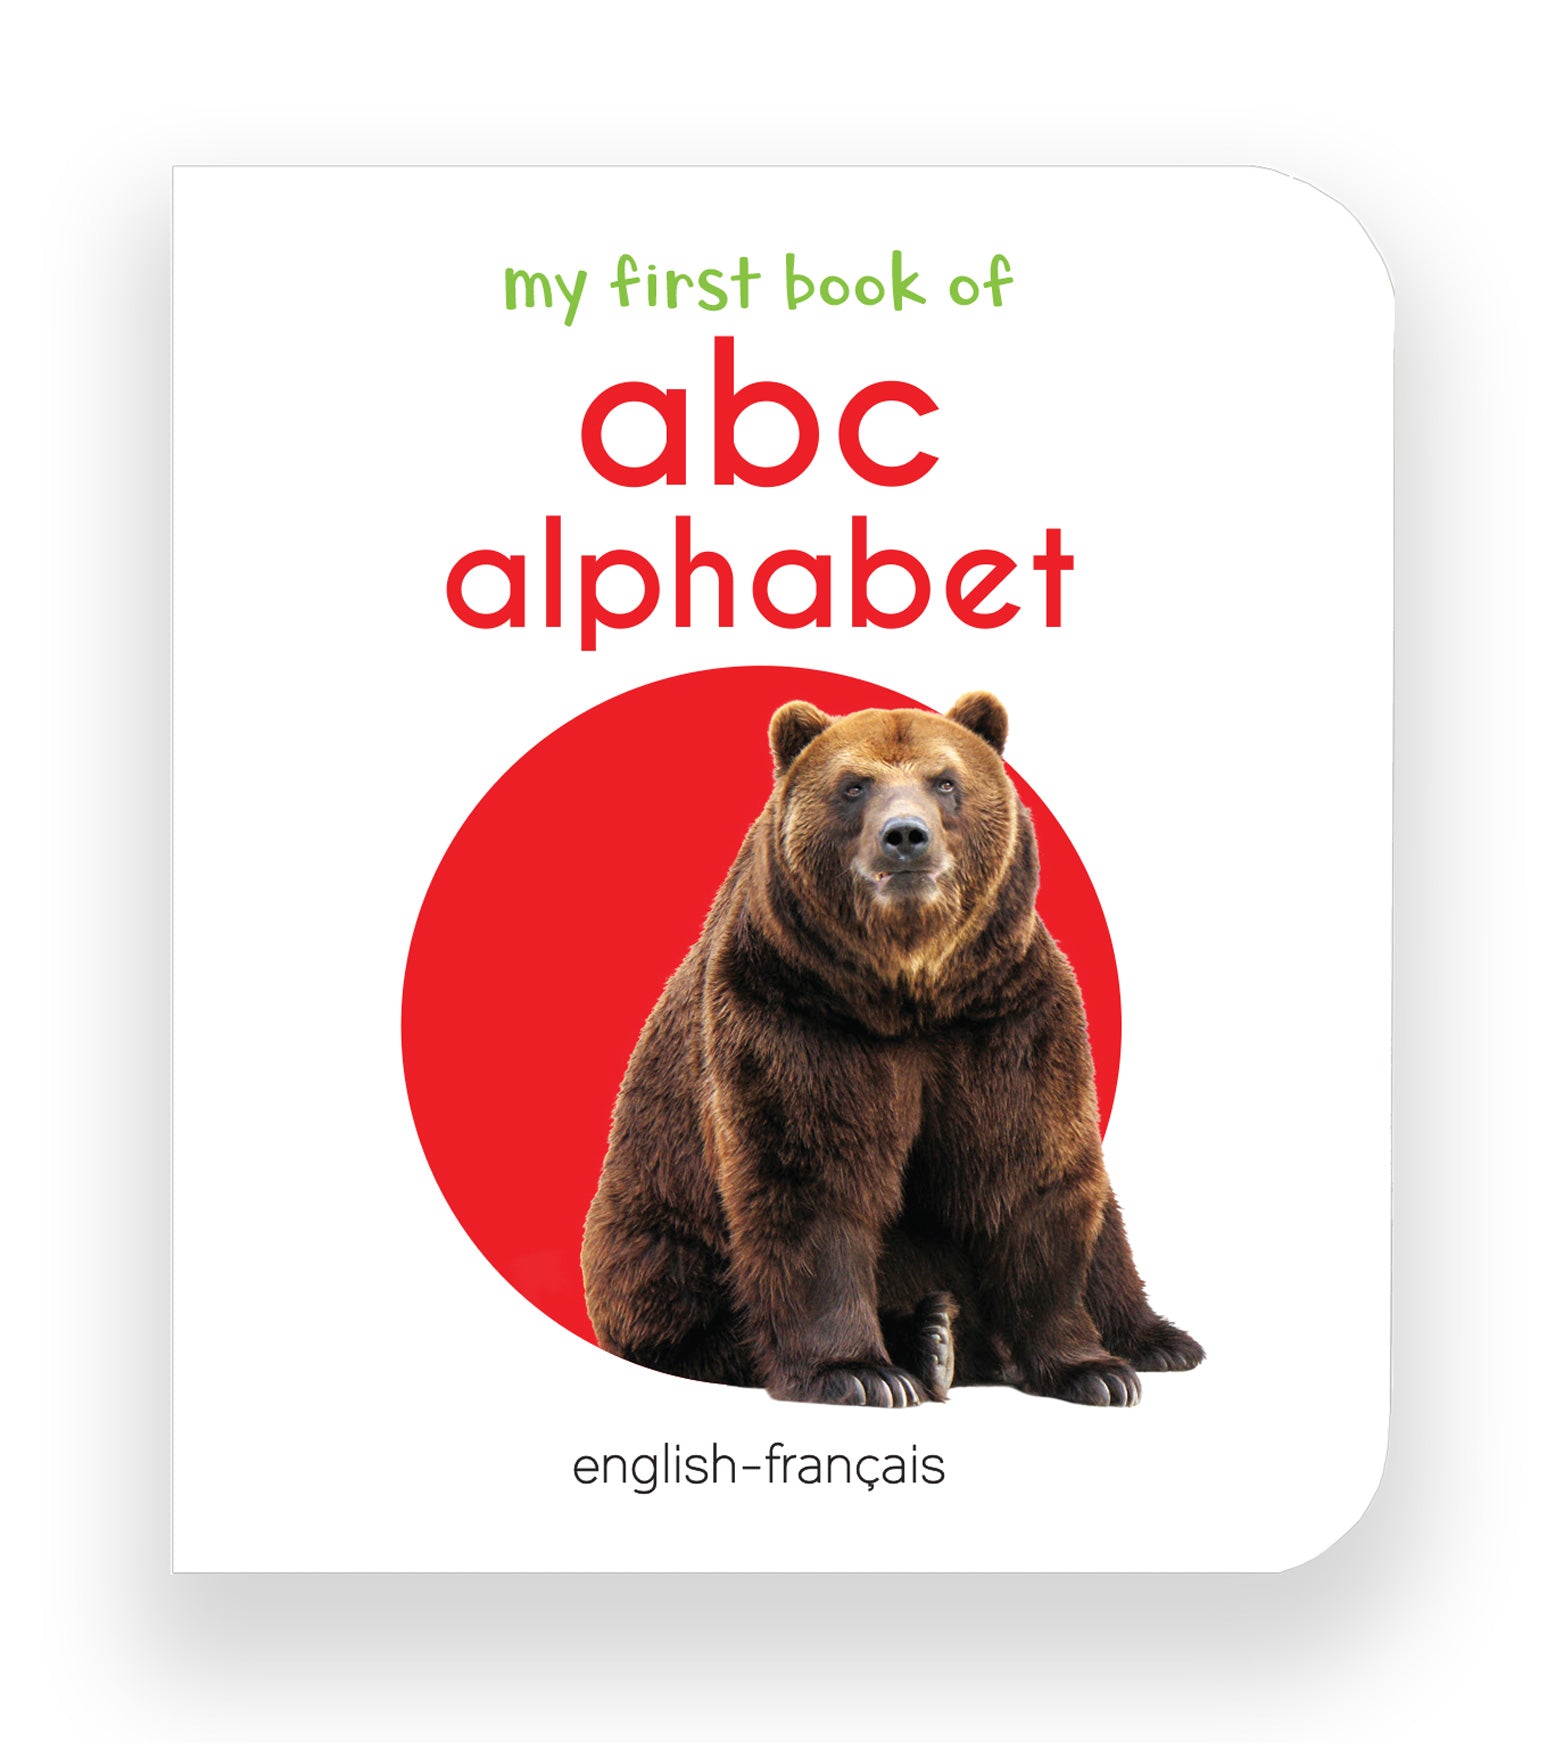 My First Book of ABC - Alphabet : My First English French Board Book (English - Francais)